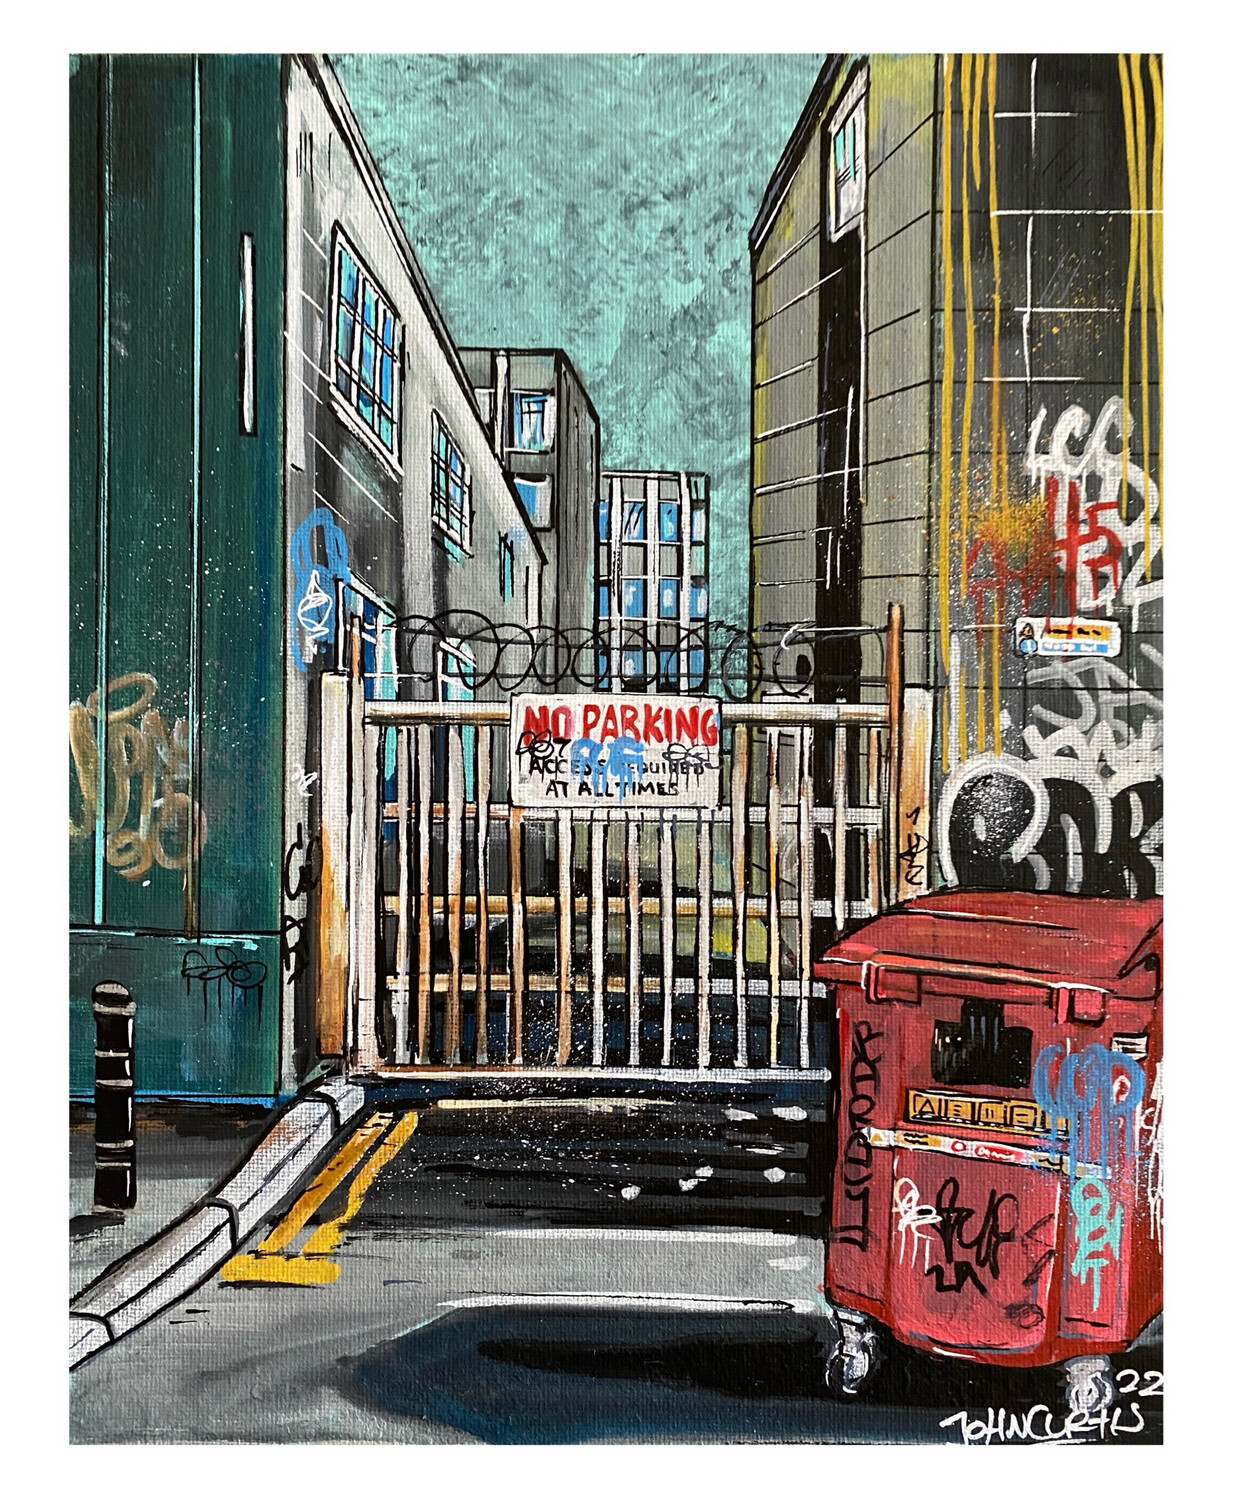 No parking - Original Painting On Canvas Board